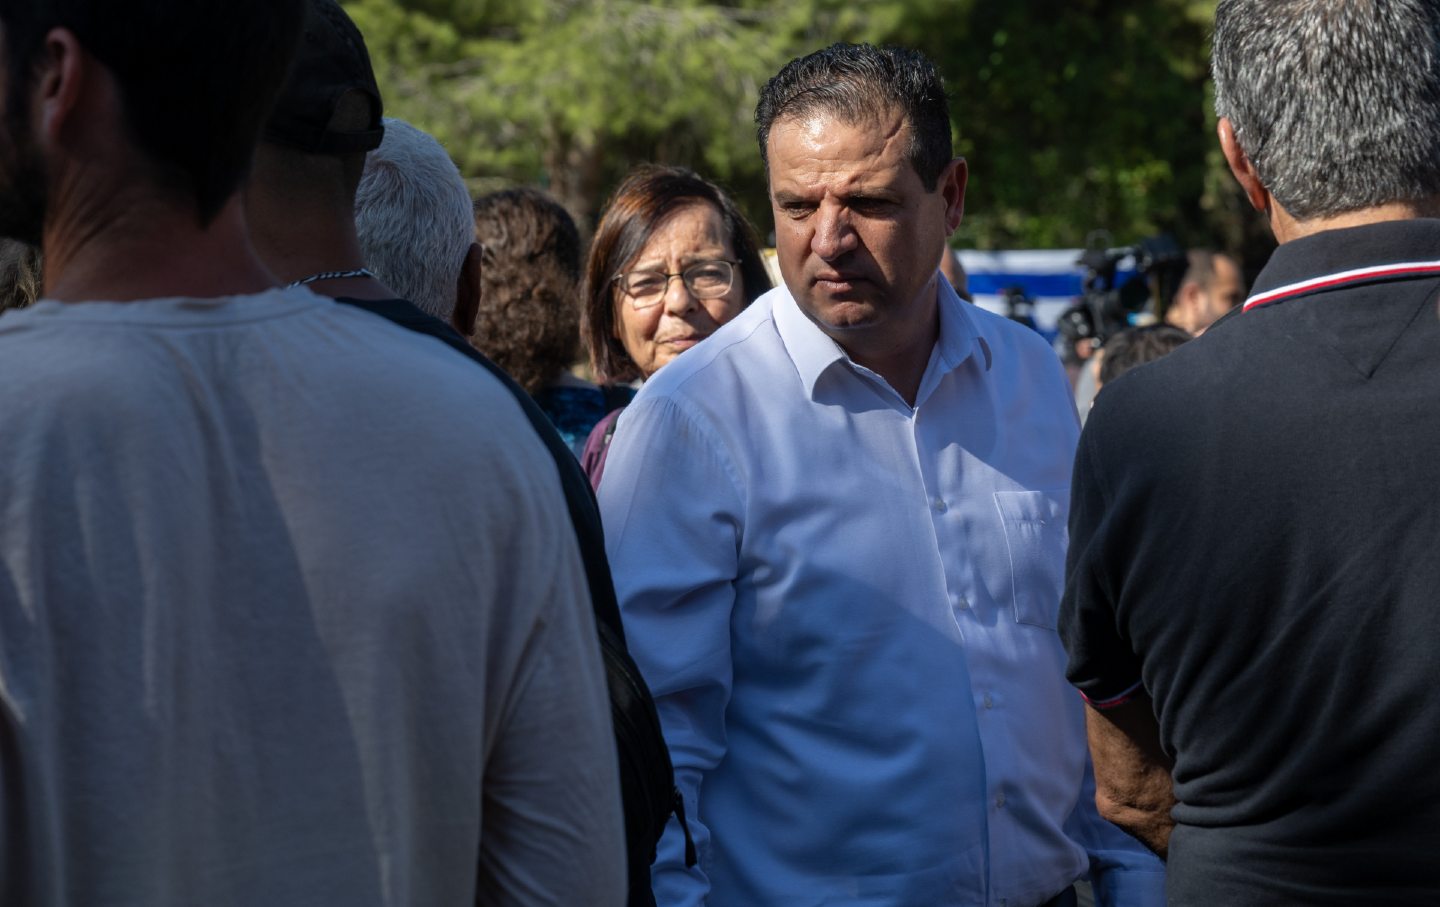 Knesset member Ayman Odeh attends a memorial service for Vivian Silver in Tel Gezer, Israel.